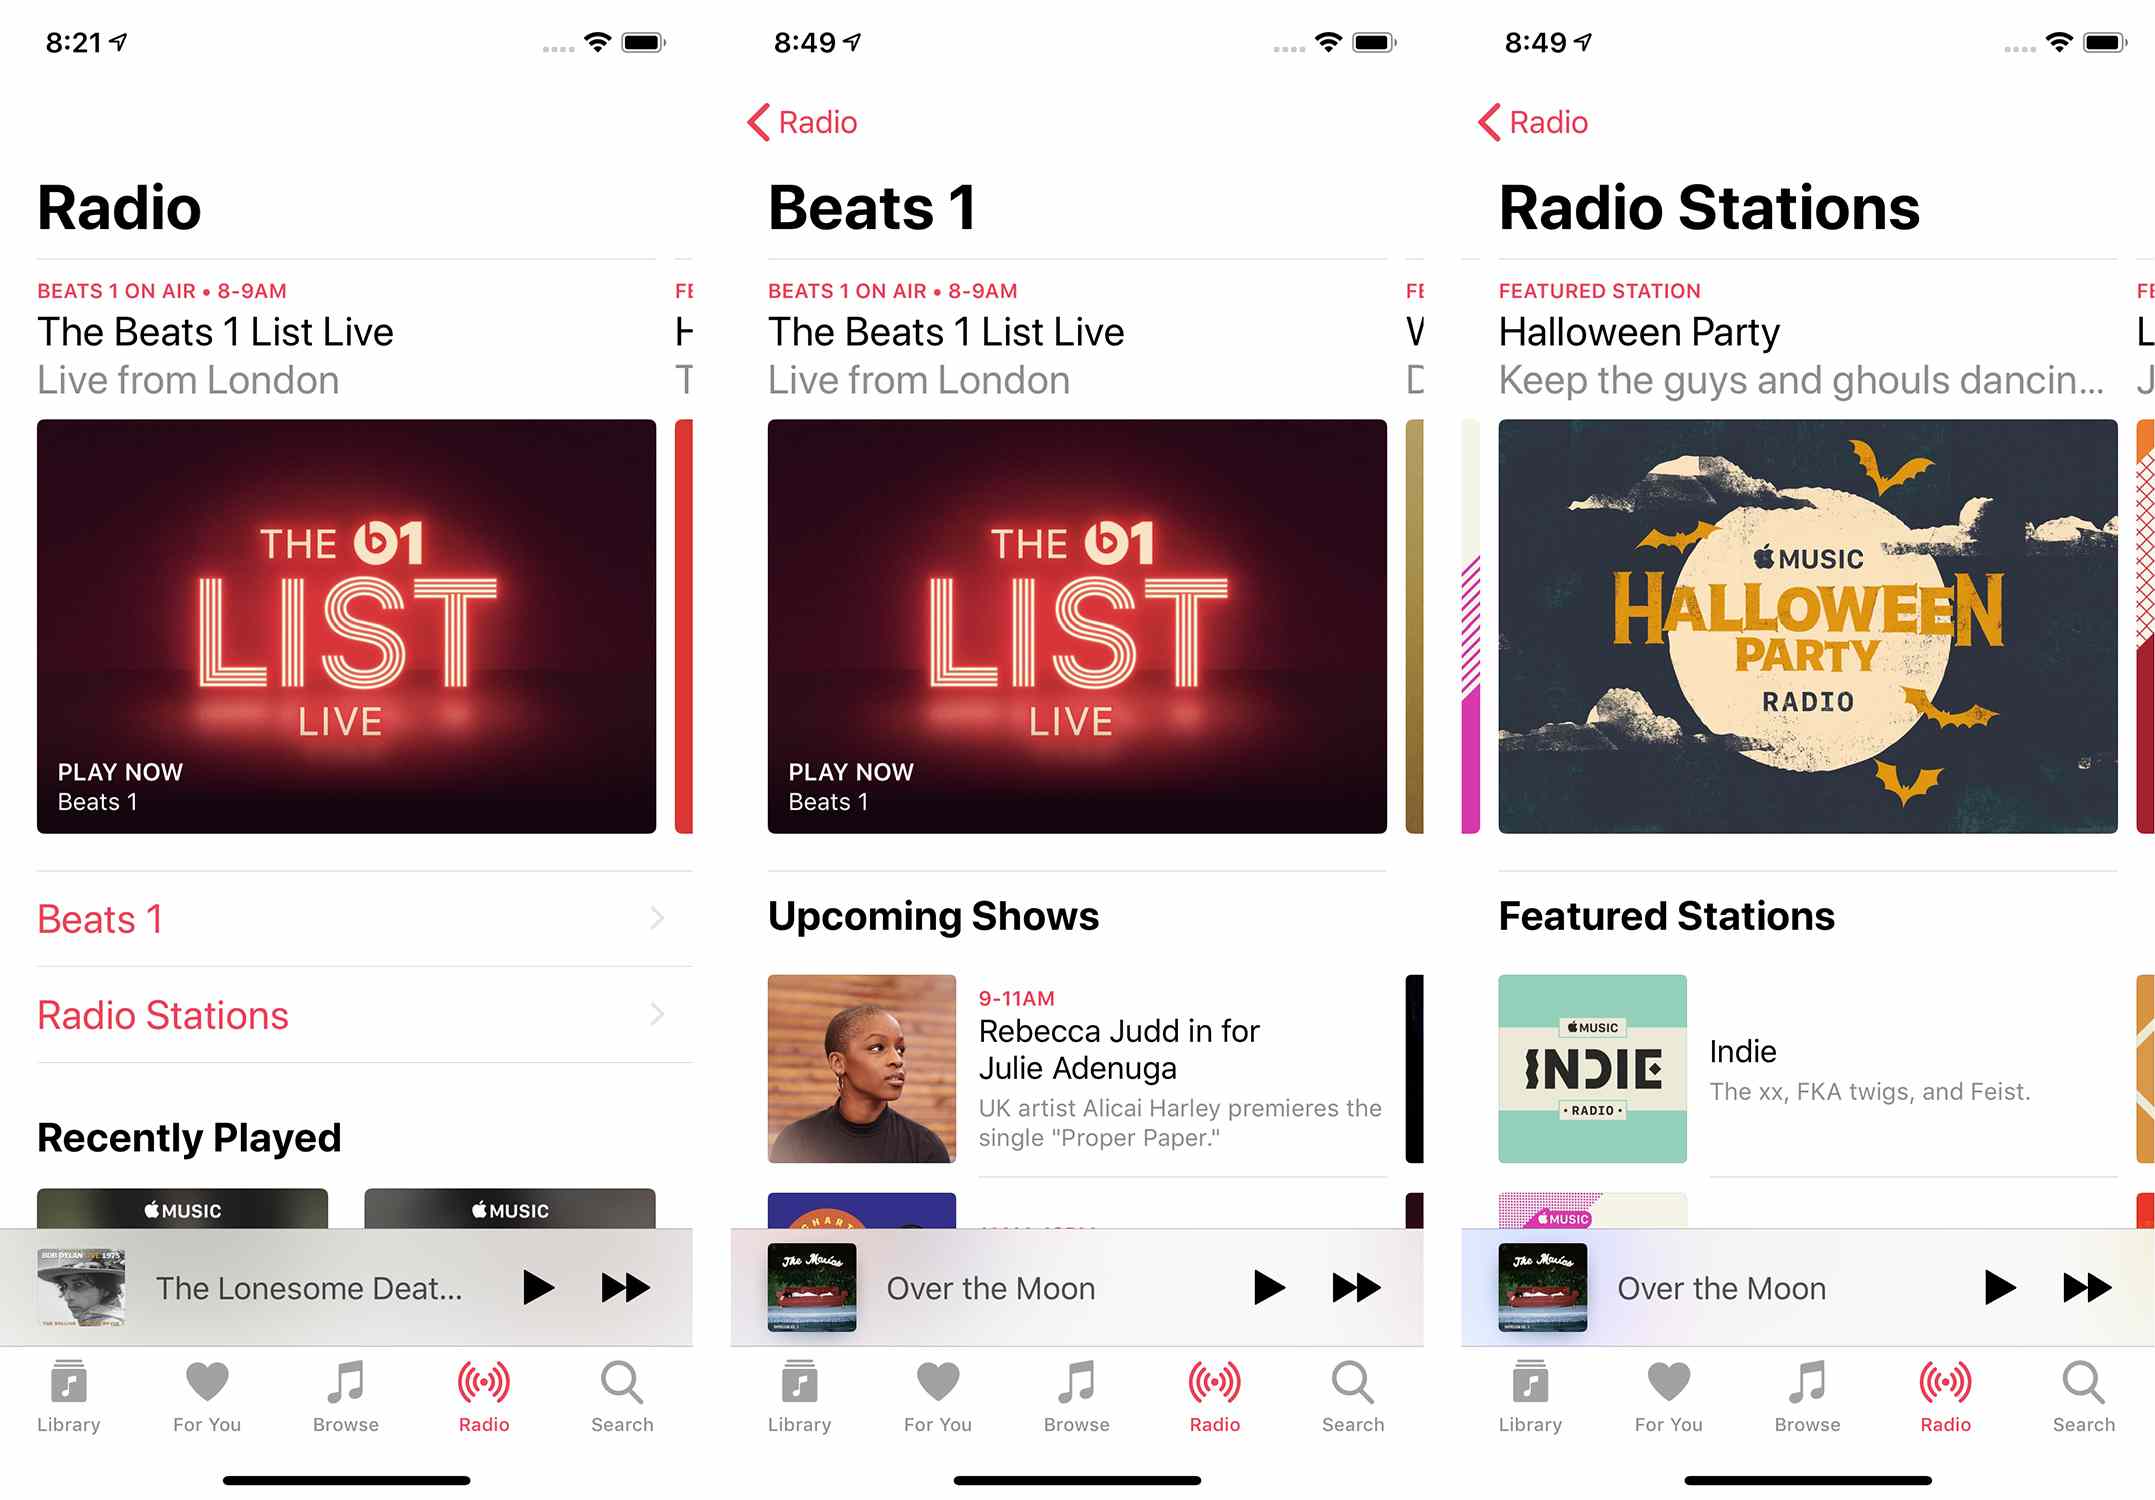 How To Add Radio Stations To ITunes